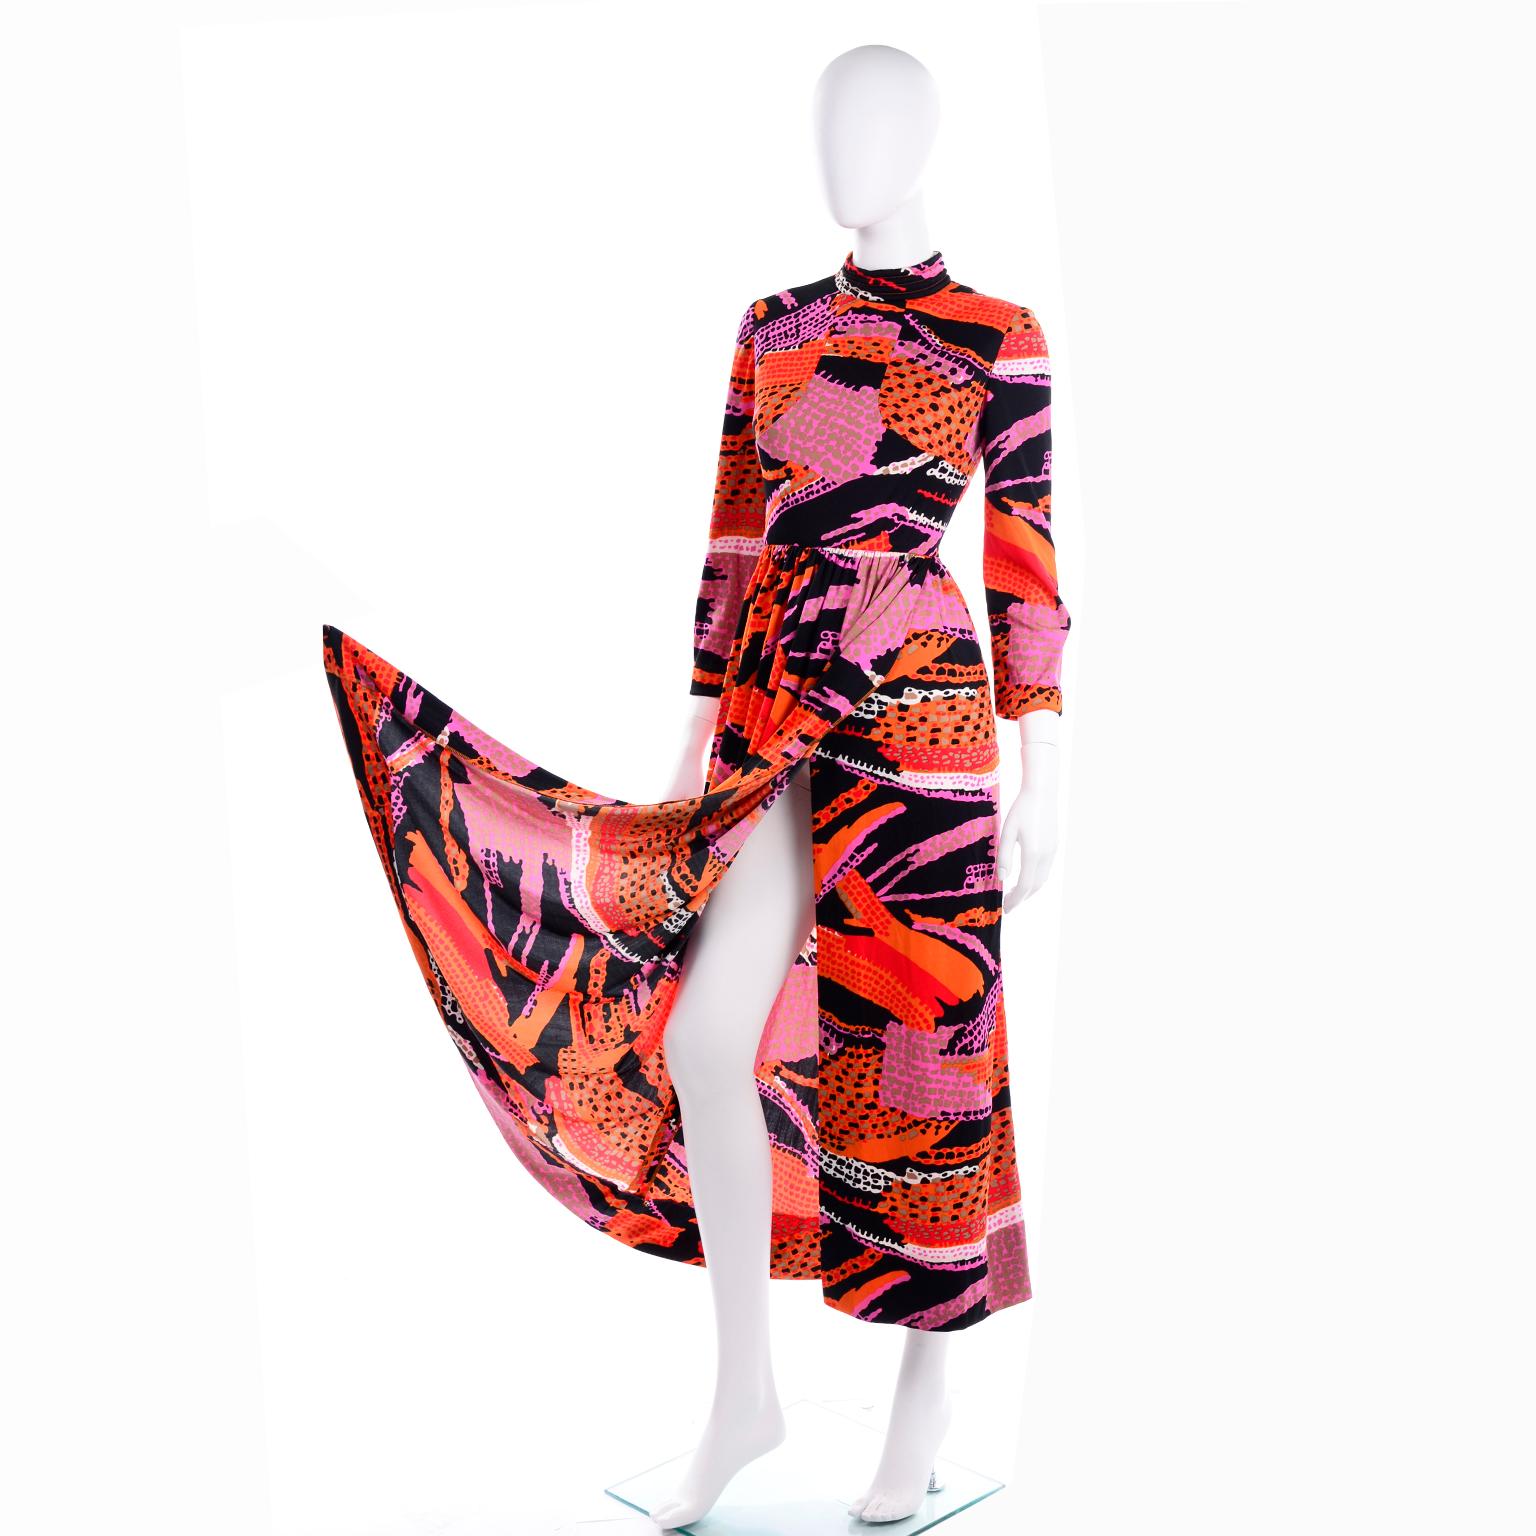 This great vintage early 1970's Dynasty knit dress is in an incredible orange, purple, black and pink, abstract print. The bust is lined and the dress closes with a hook and eye on the back of the neckline as well as a metal zipper down the center